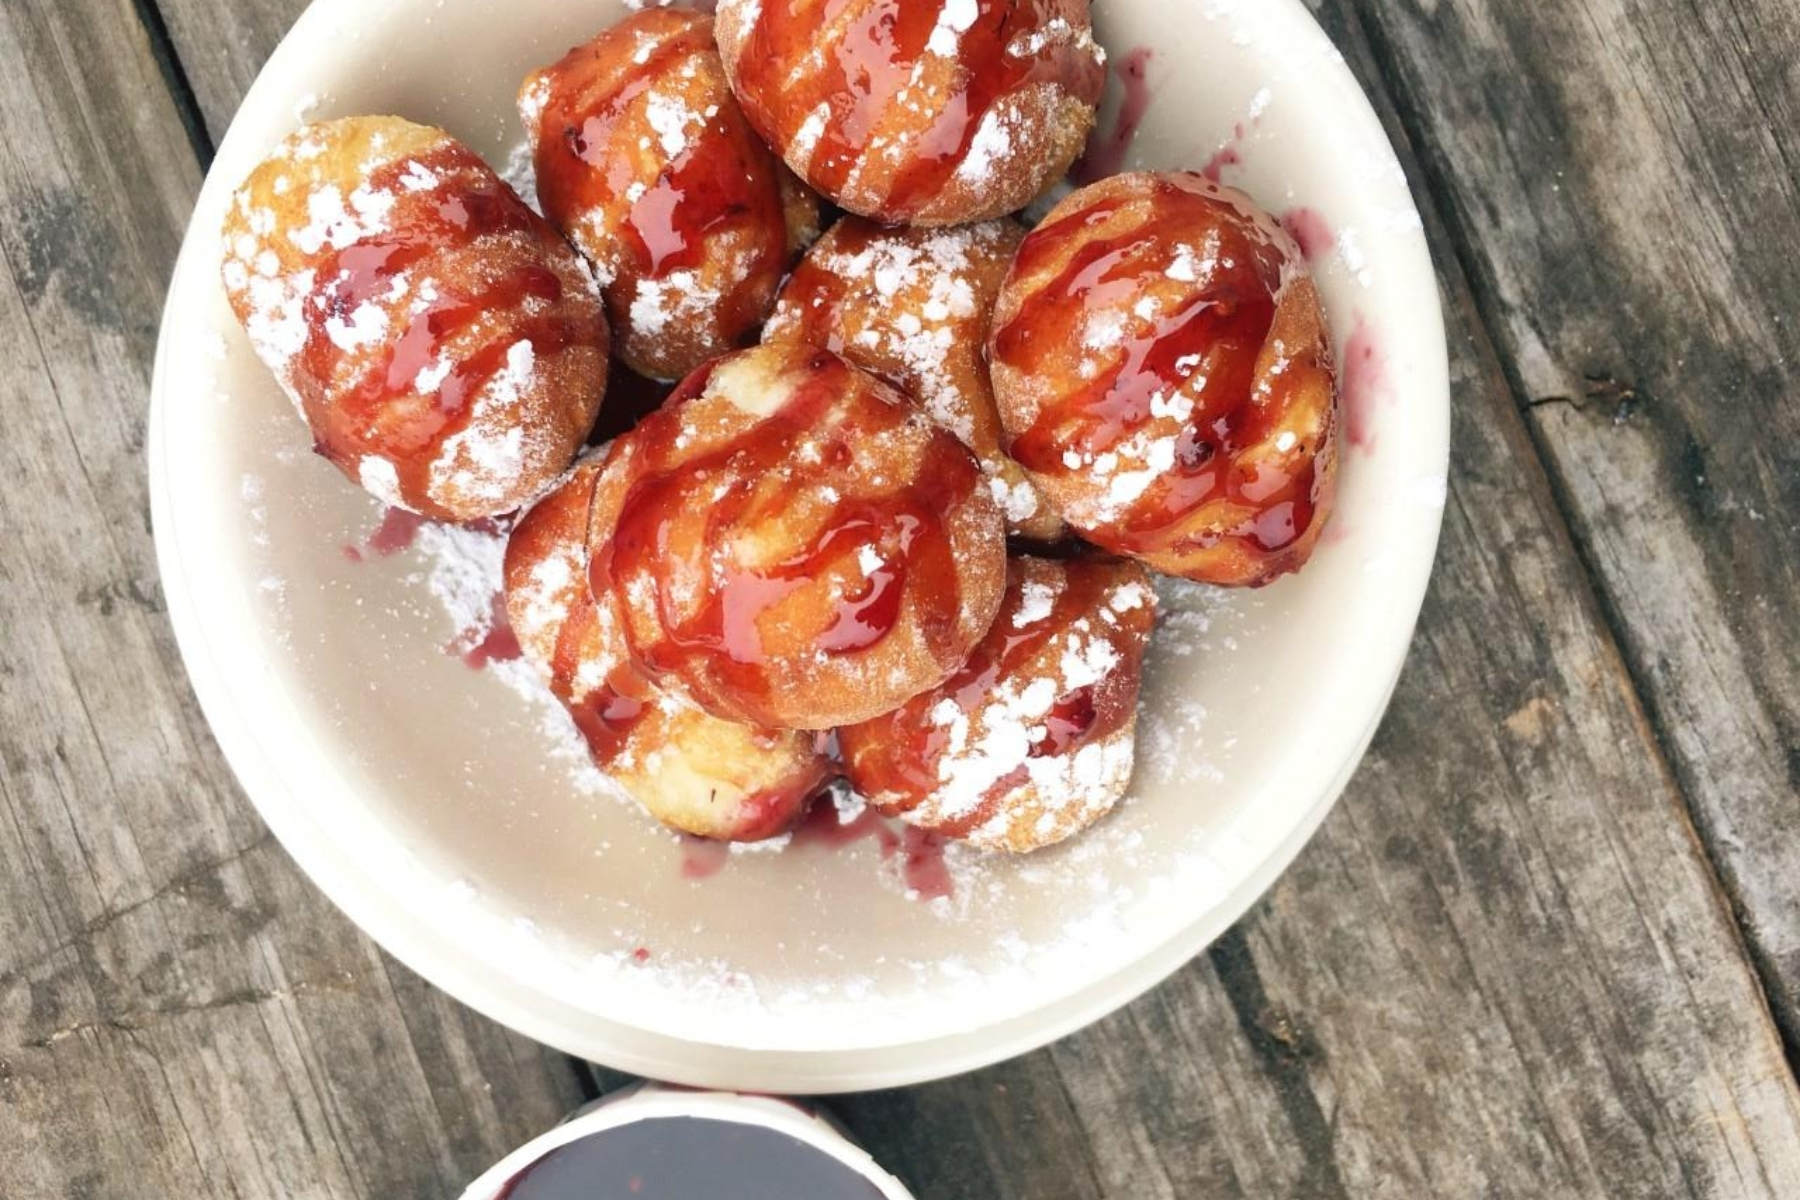 A white plate with a dessert called Goat Balls: fried biscuit dough wrapped around brie cheese, dusted with powdered sugar, and drizzled with strawberry sauce.